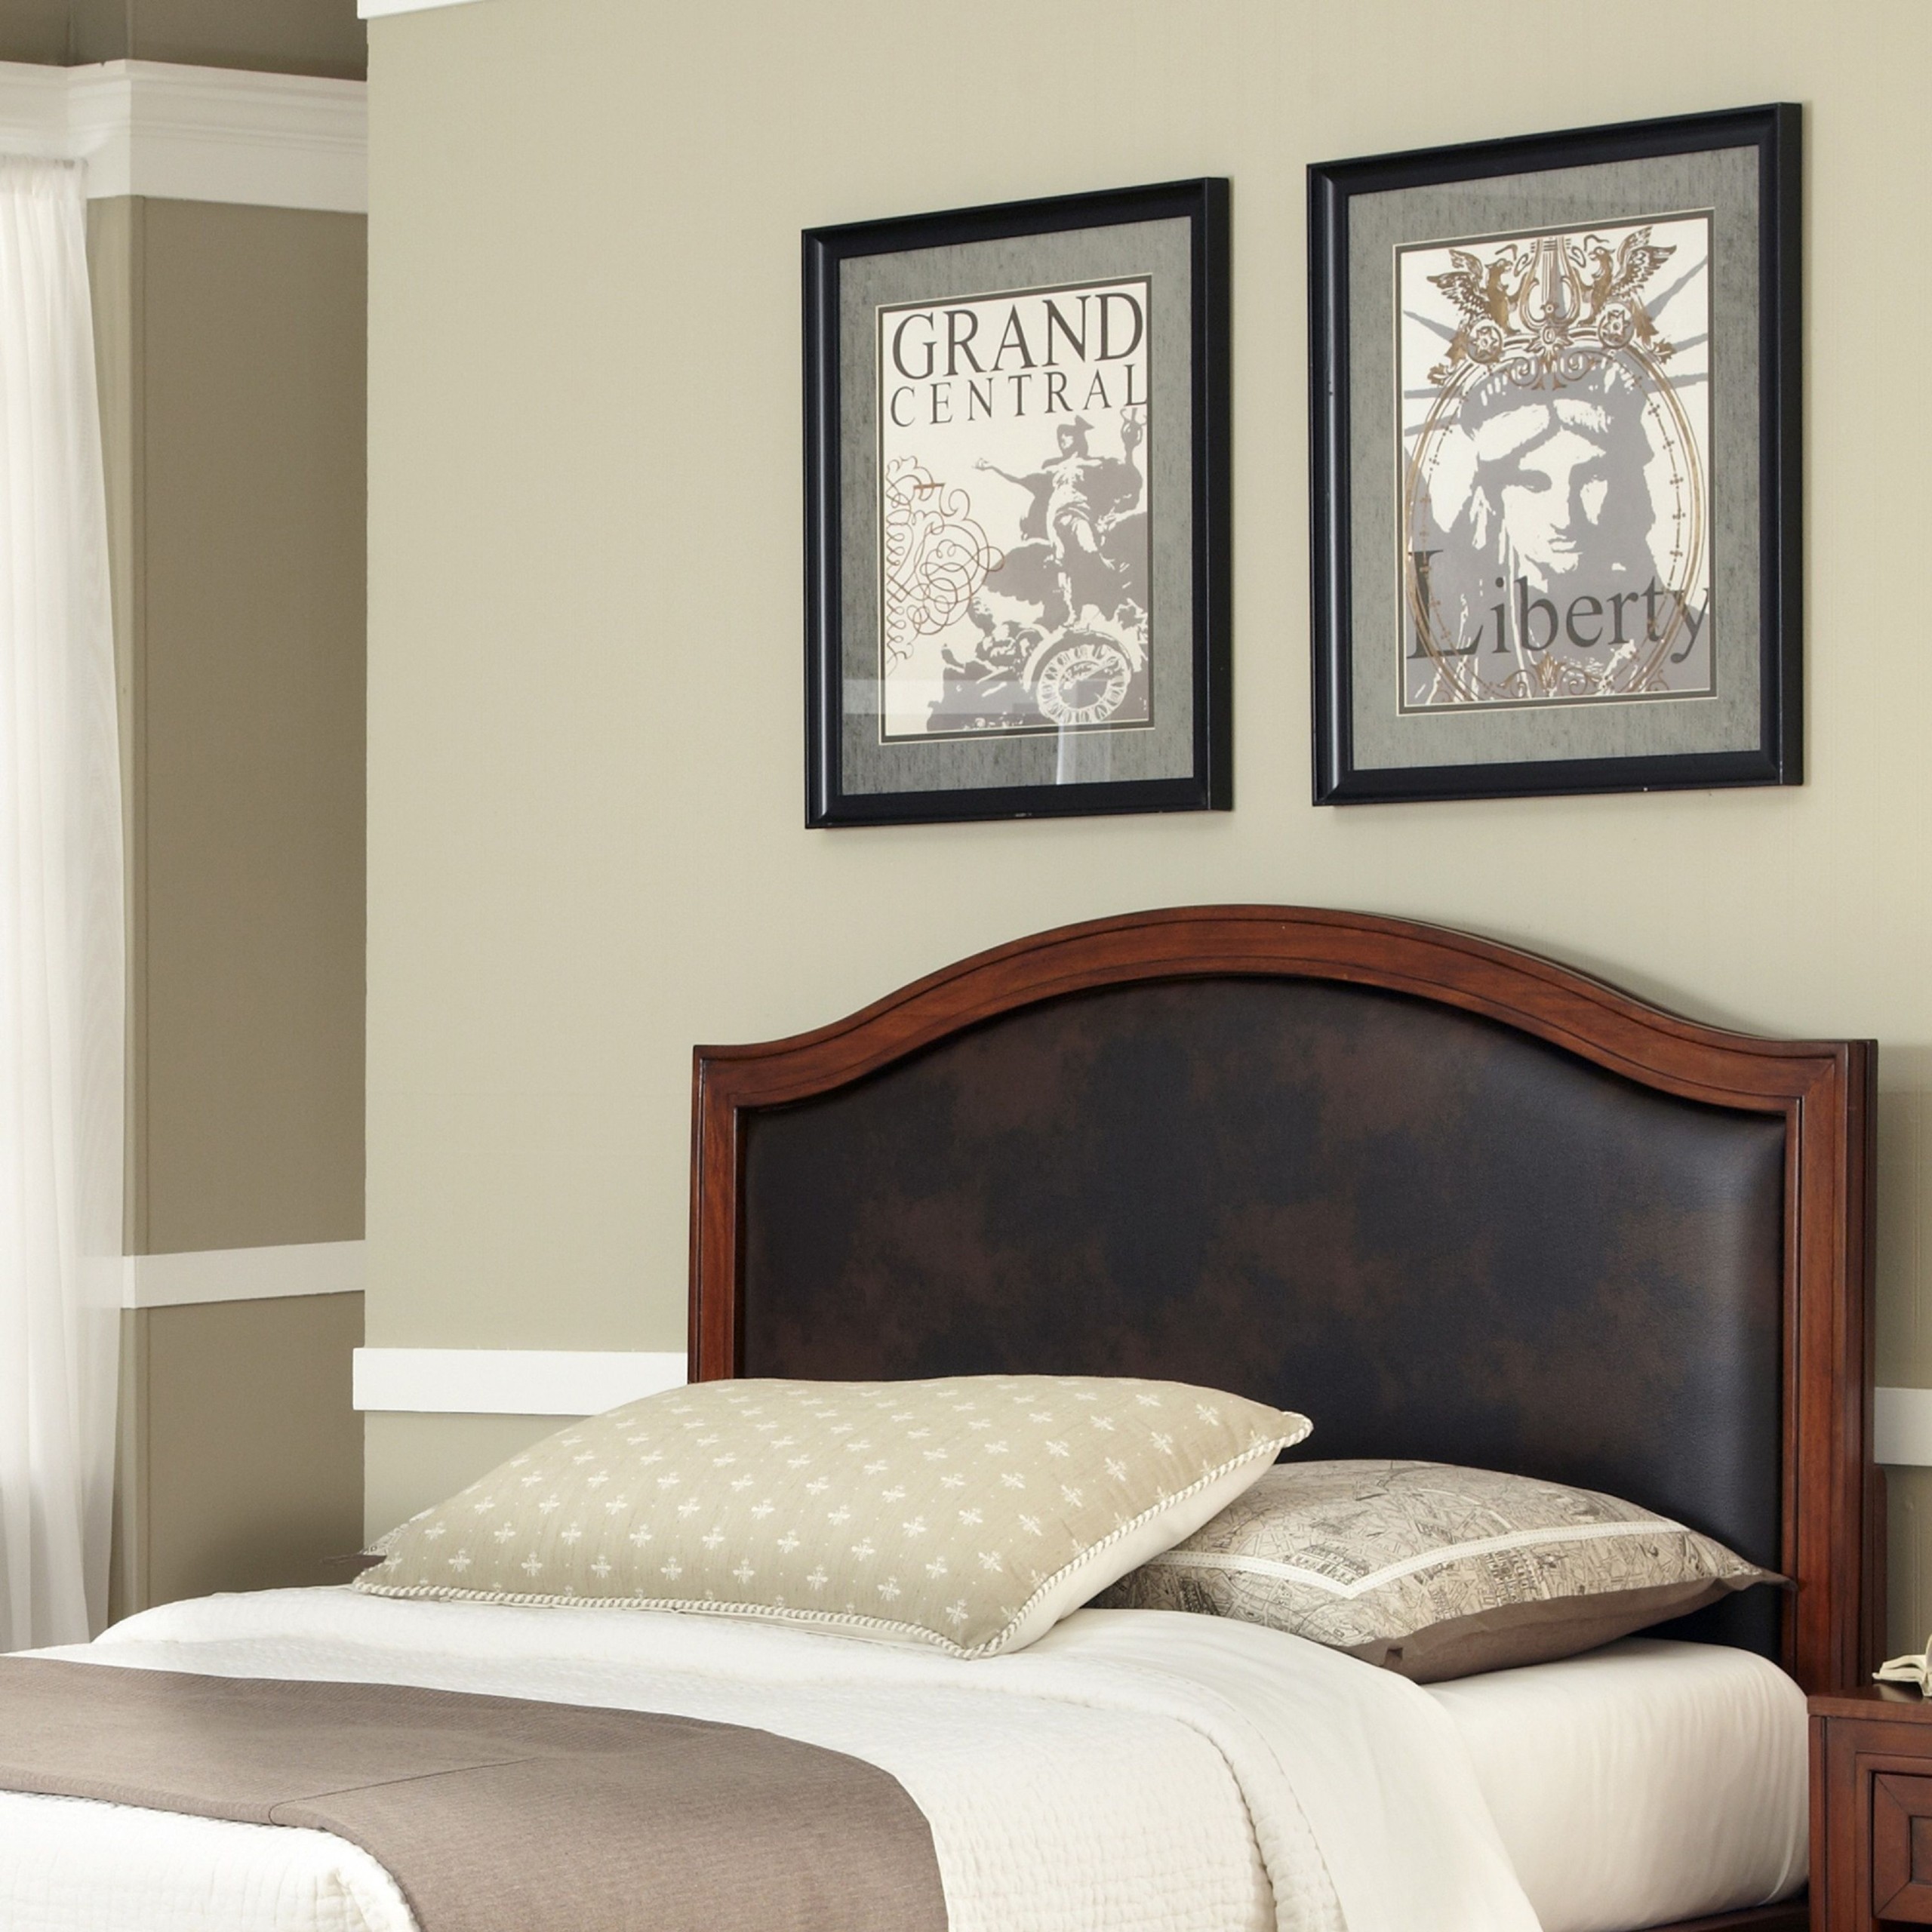 Home Styles Duet Queen Camelback Headboard, Brown Leather Inset